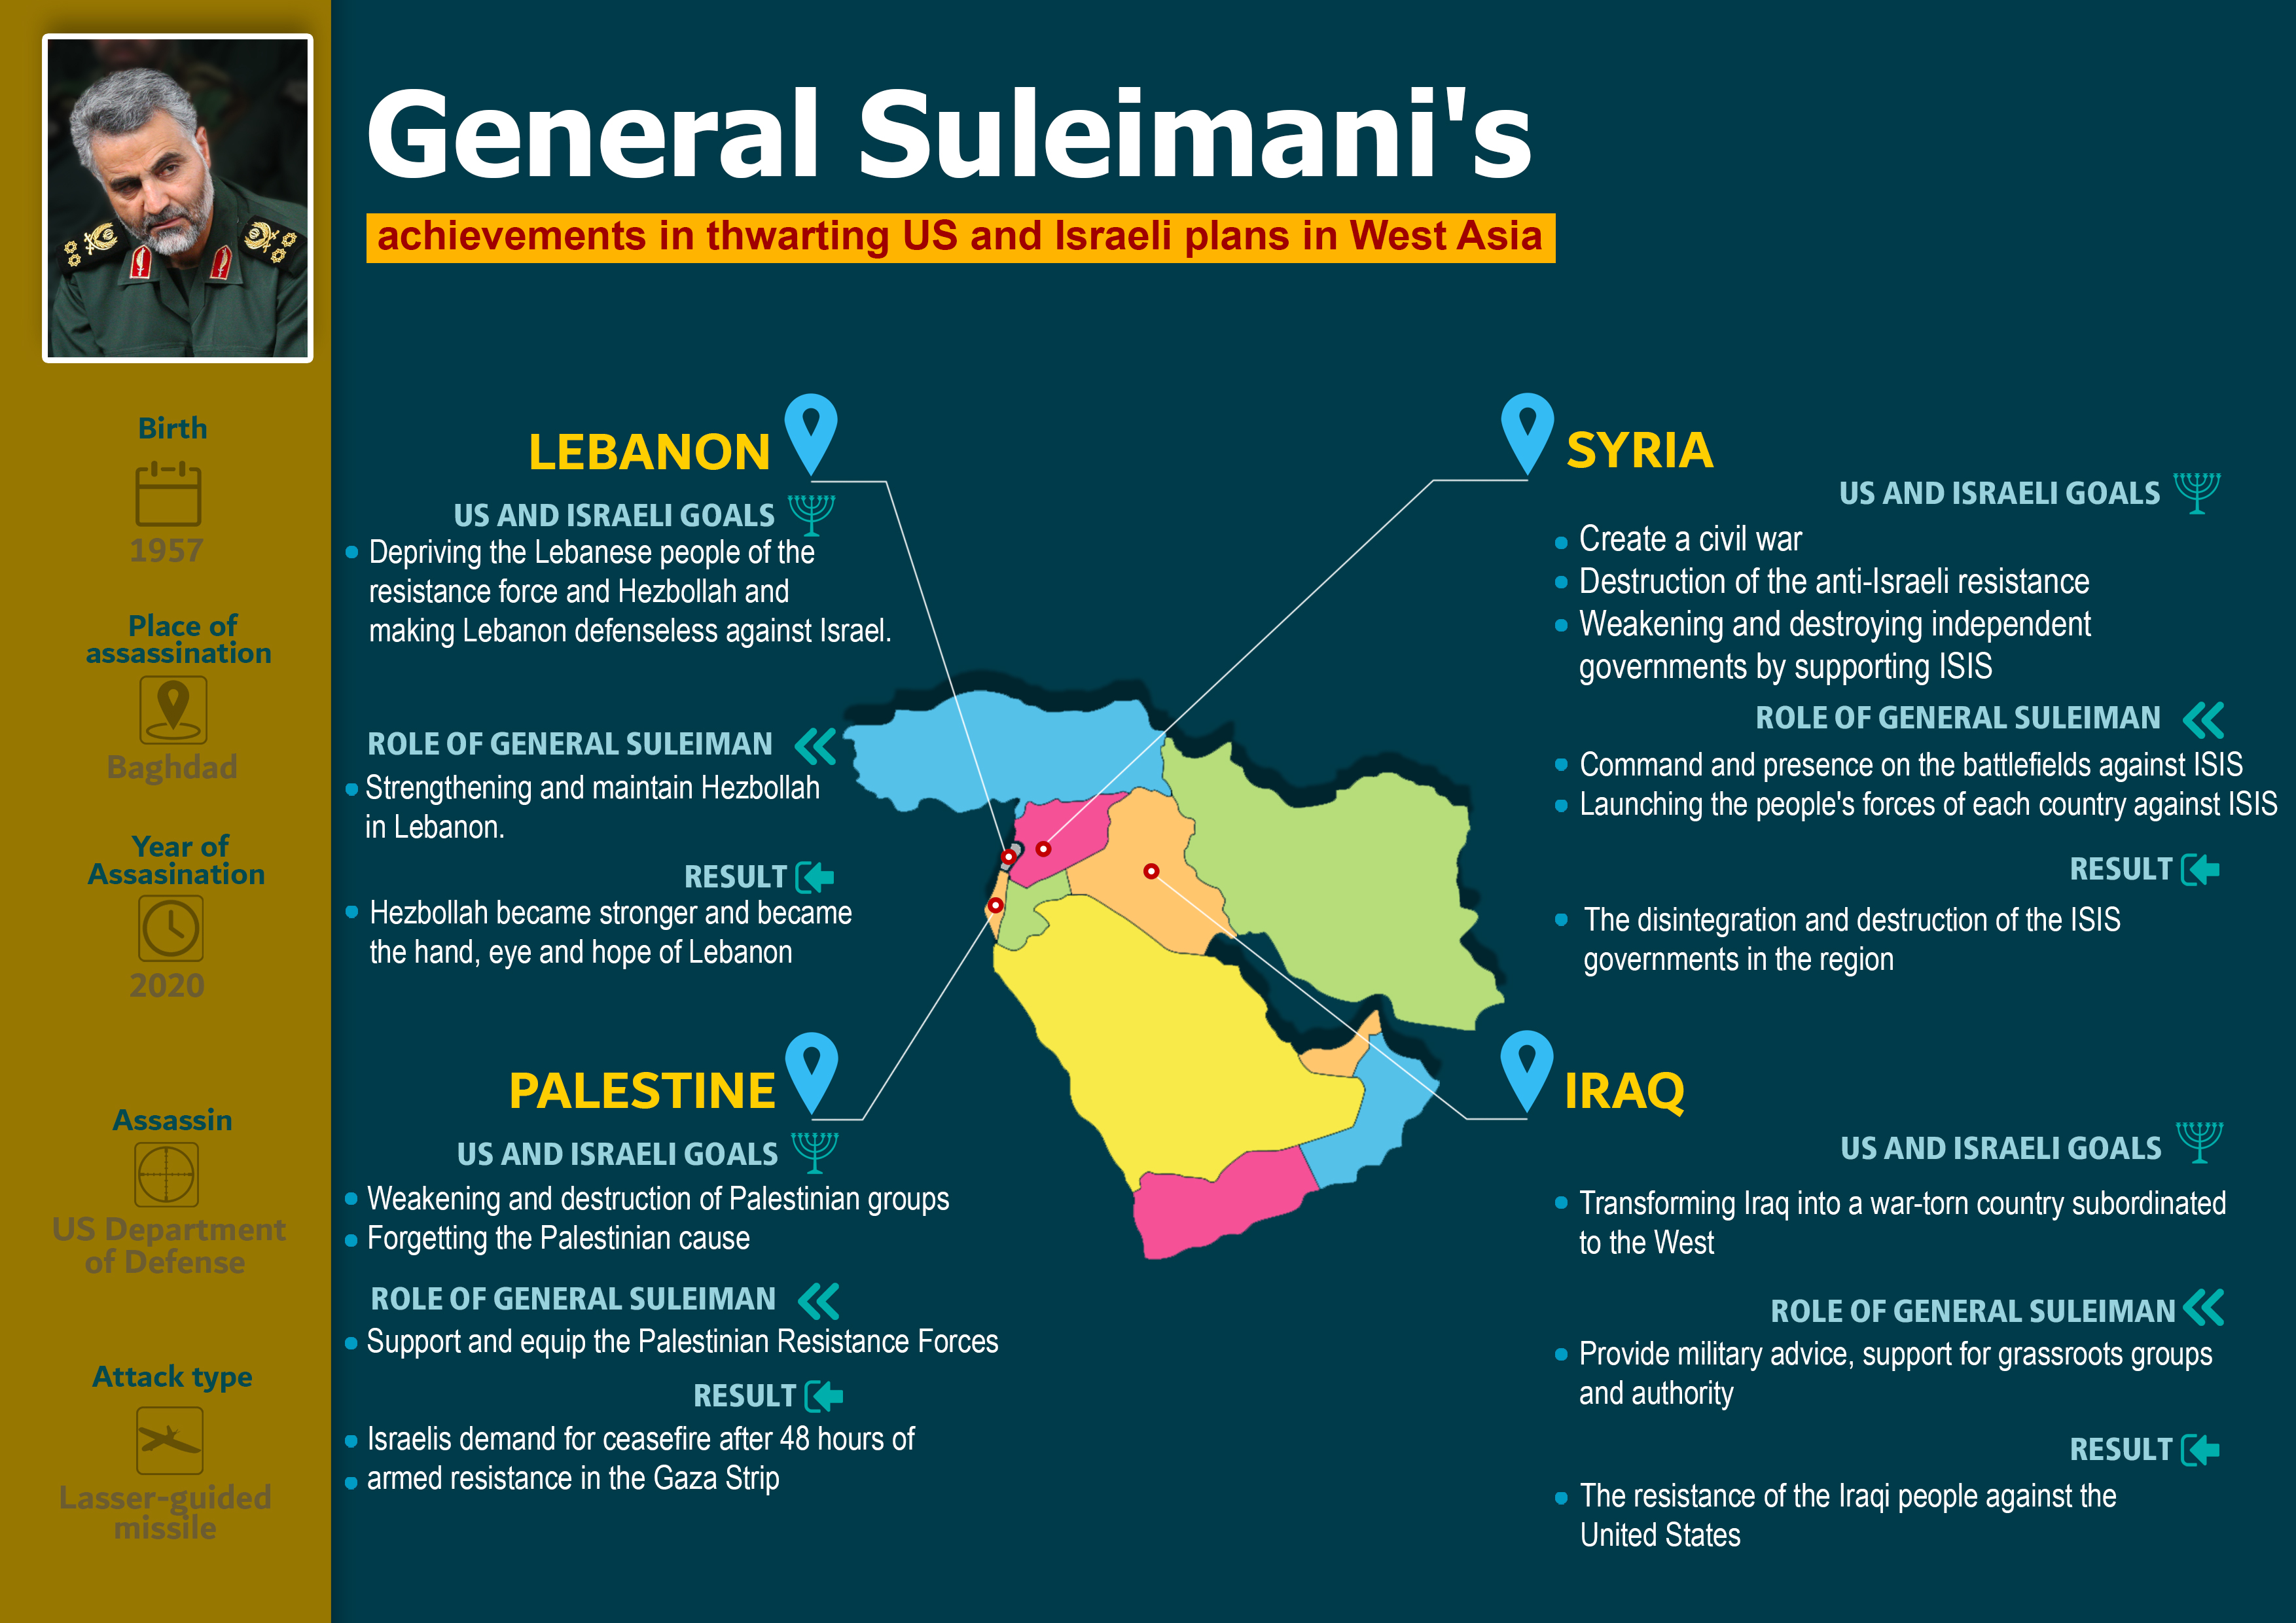 General Soleimani achievements in thwarting US and Israeli plans in West Asia